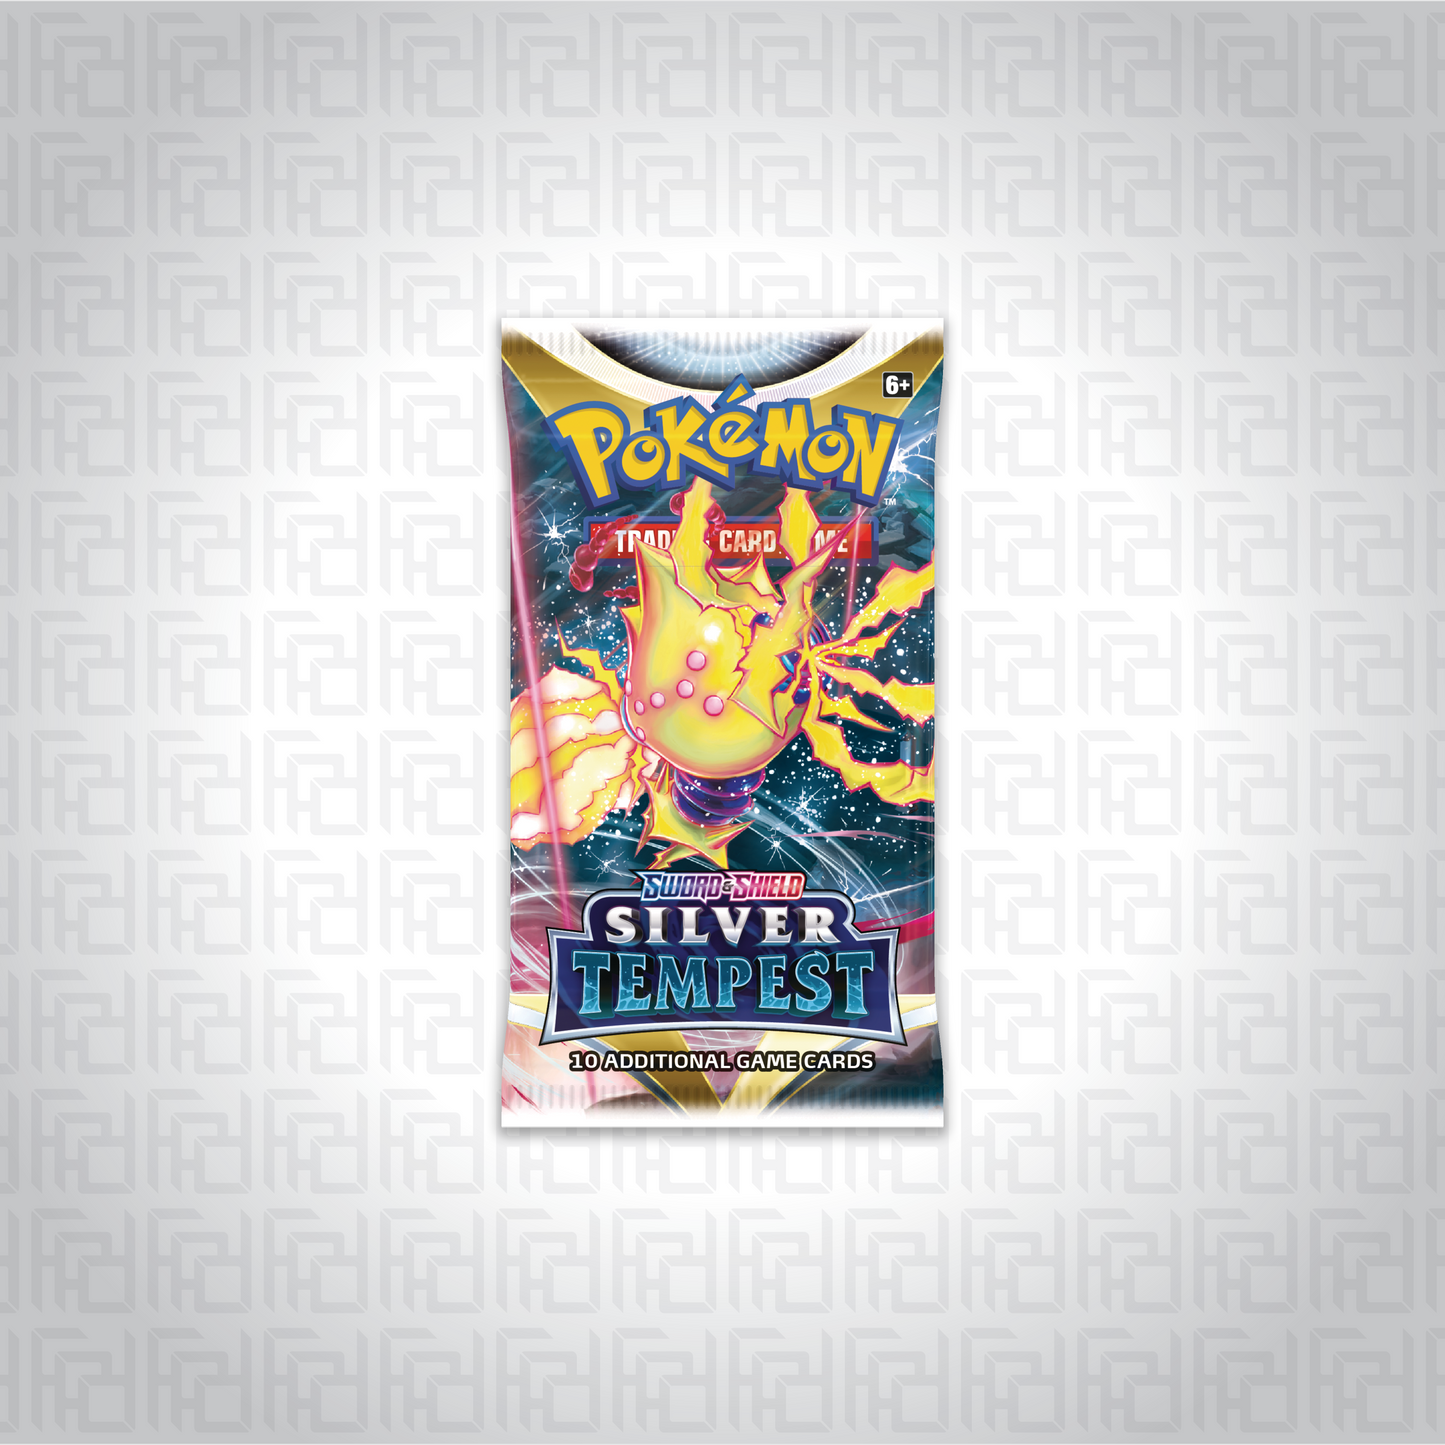 Pokemon TCG: Sword & Shield—Silver Tempest booster pack